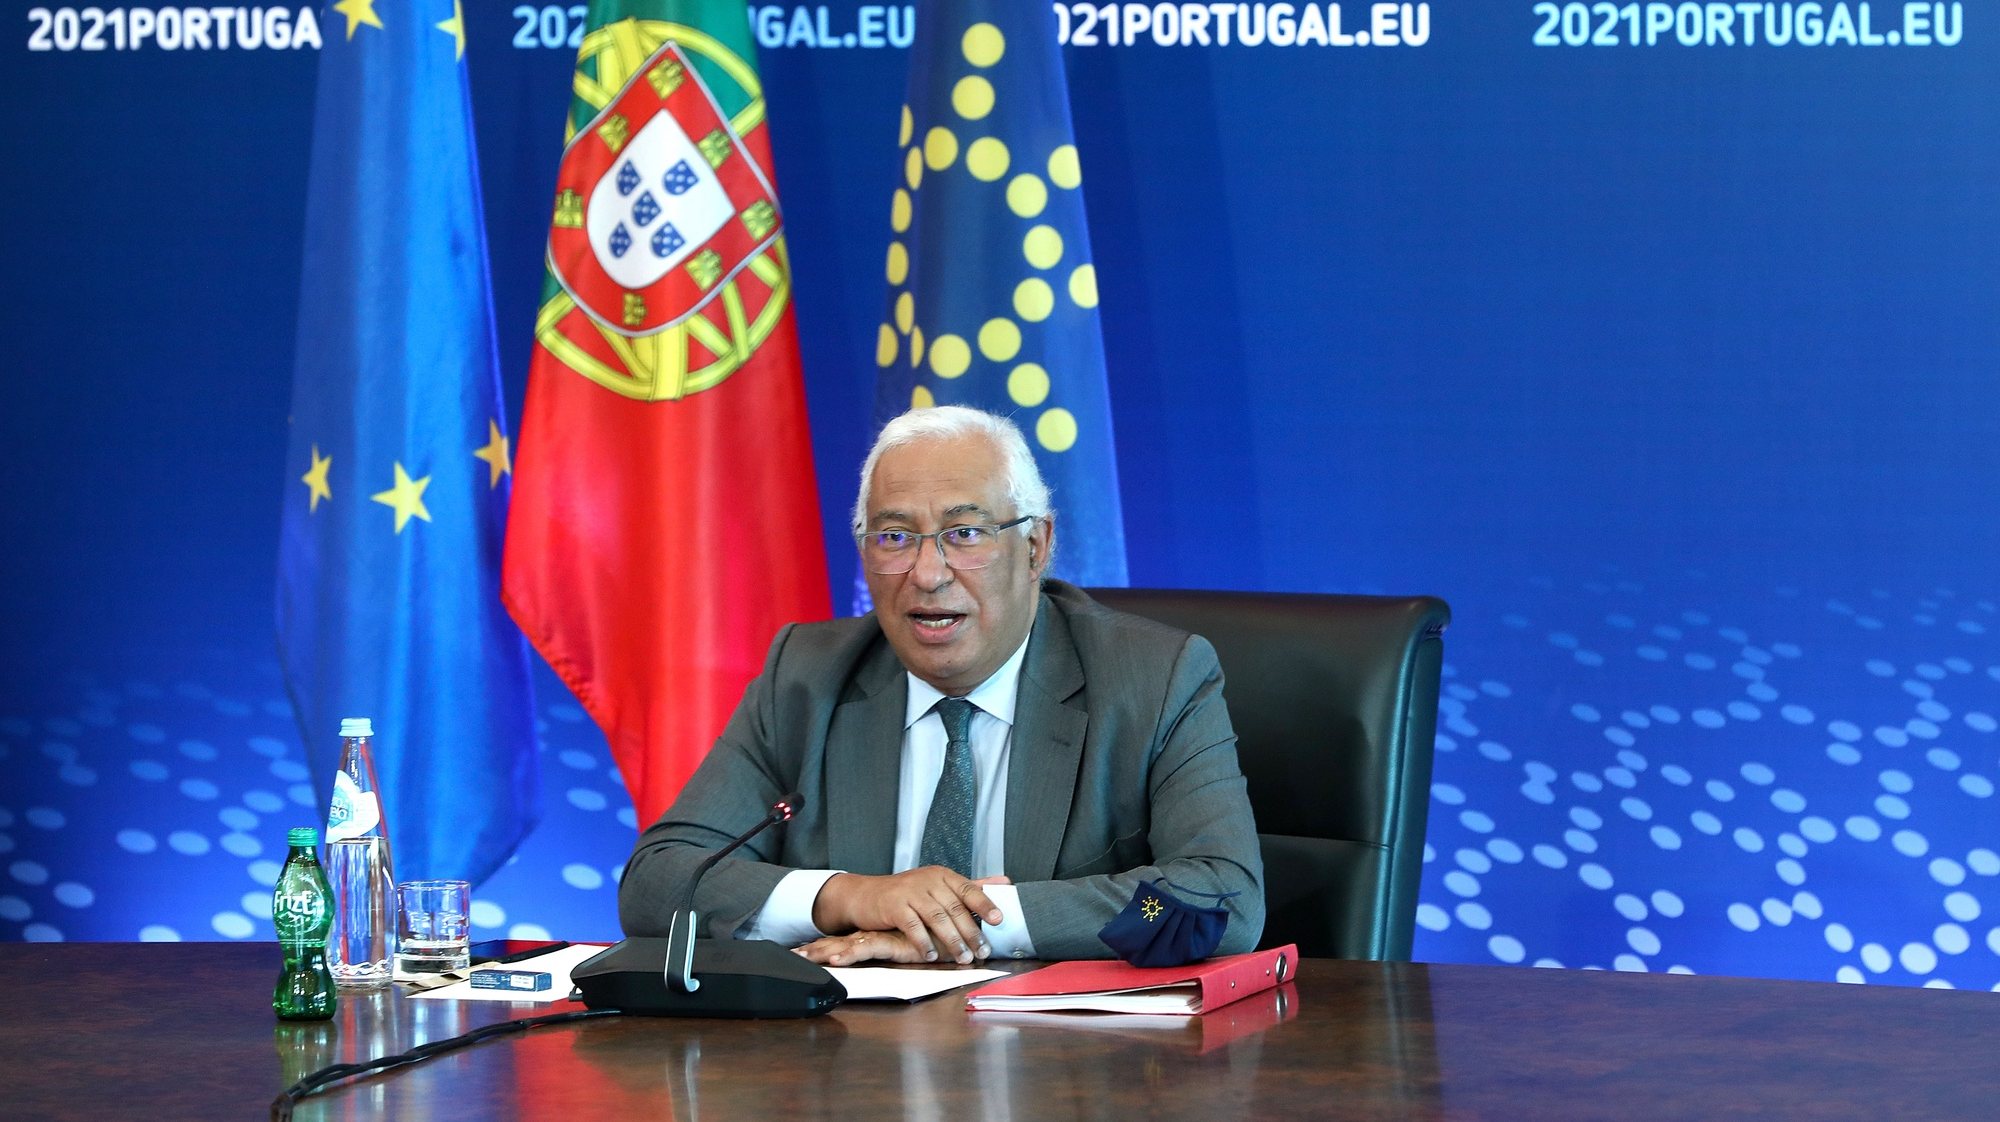 Portuguese Prime Minister Antonio Costa attends to a video conference of the members of the European Council to discuss the current situation of the COVID-19 pandemic, preparedness for health threats, security and defence, and relations with the Southern Neighbourhood, in Lisbon, Portugal, 25 February 2021.  ANTONIO PEDRO SANTOS/LUSA